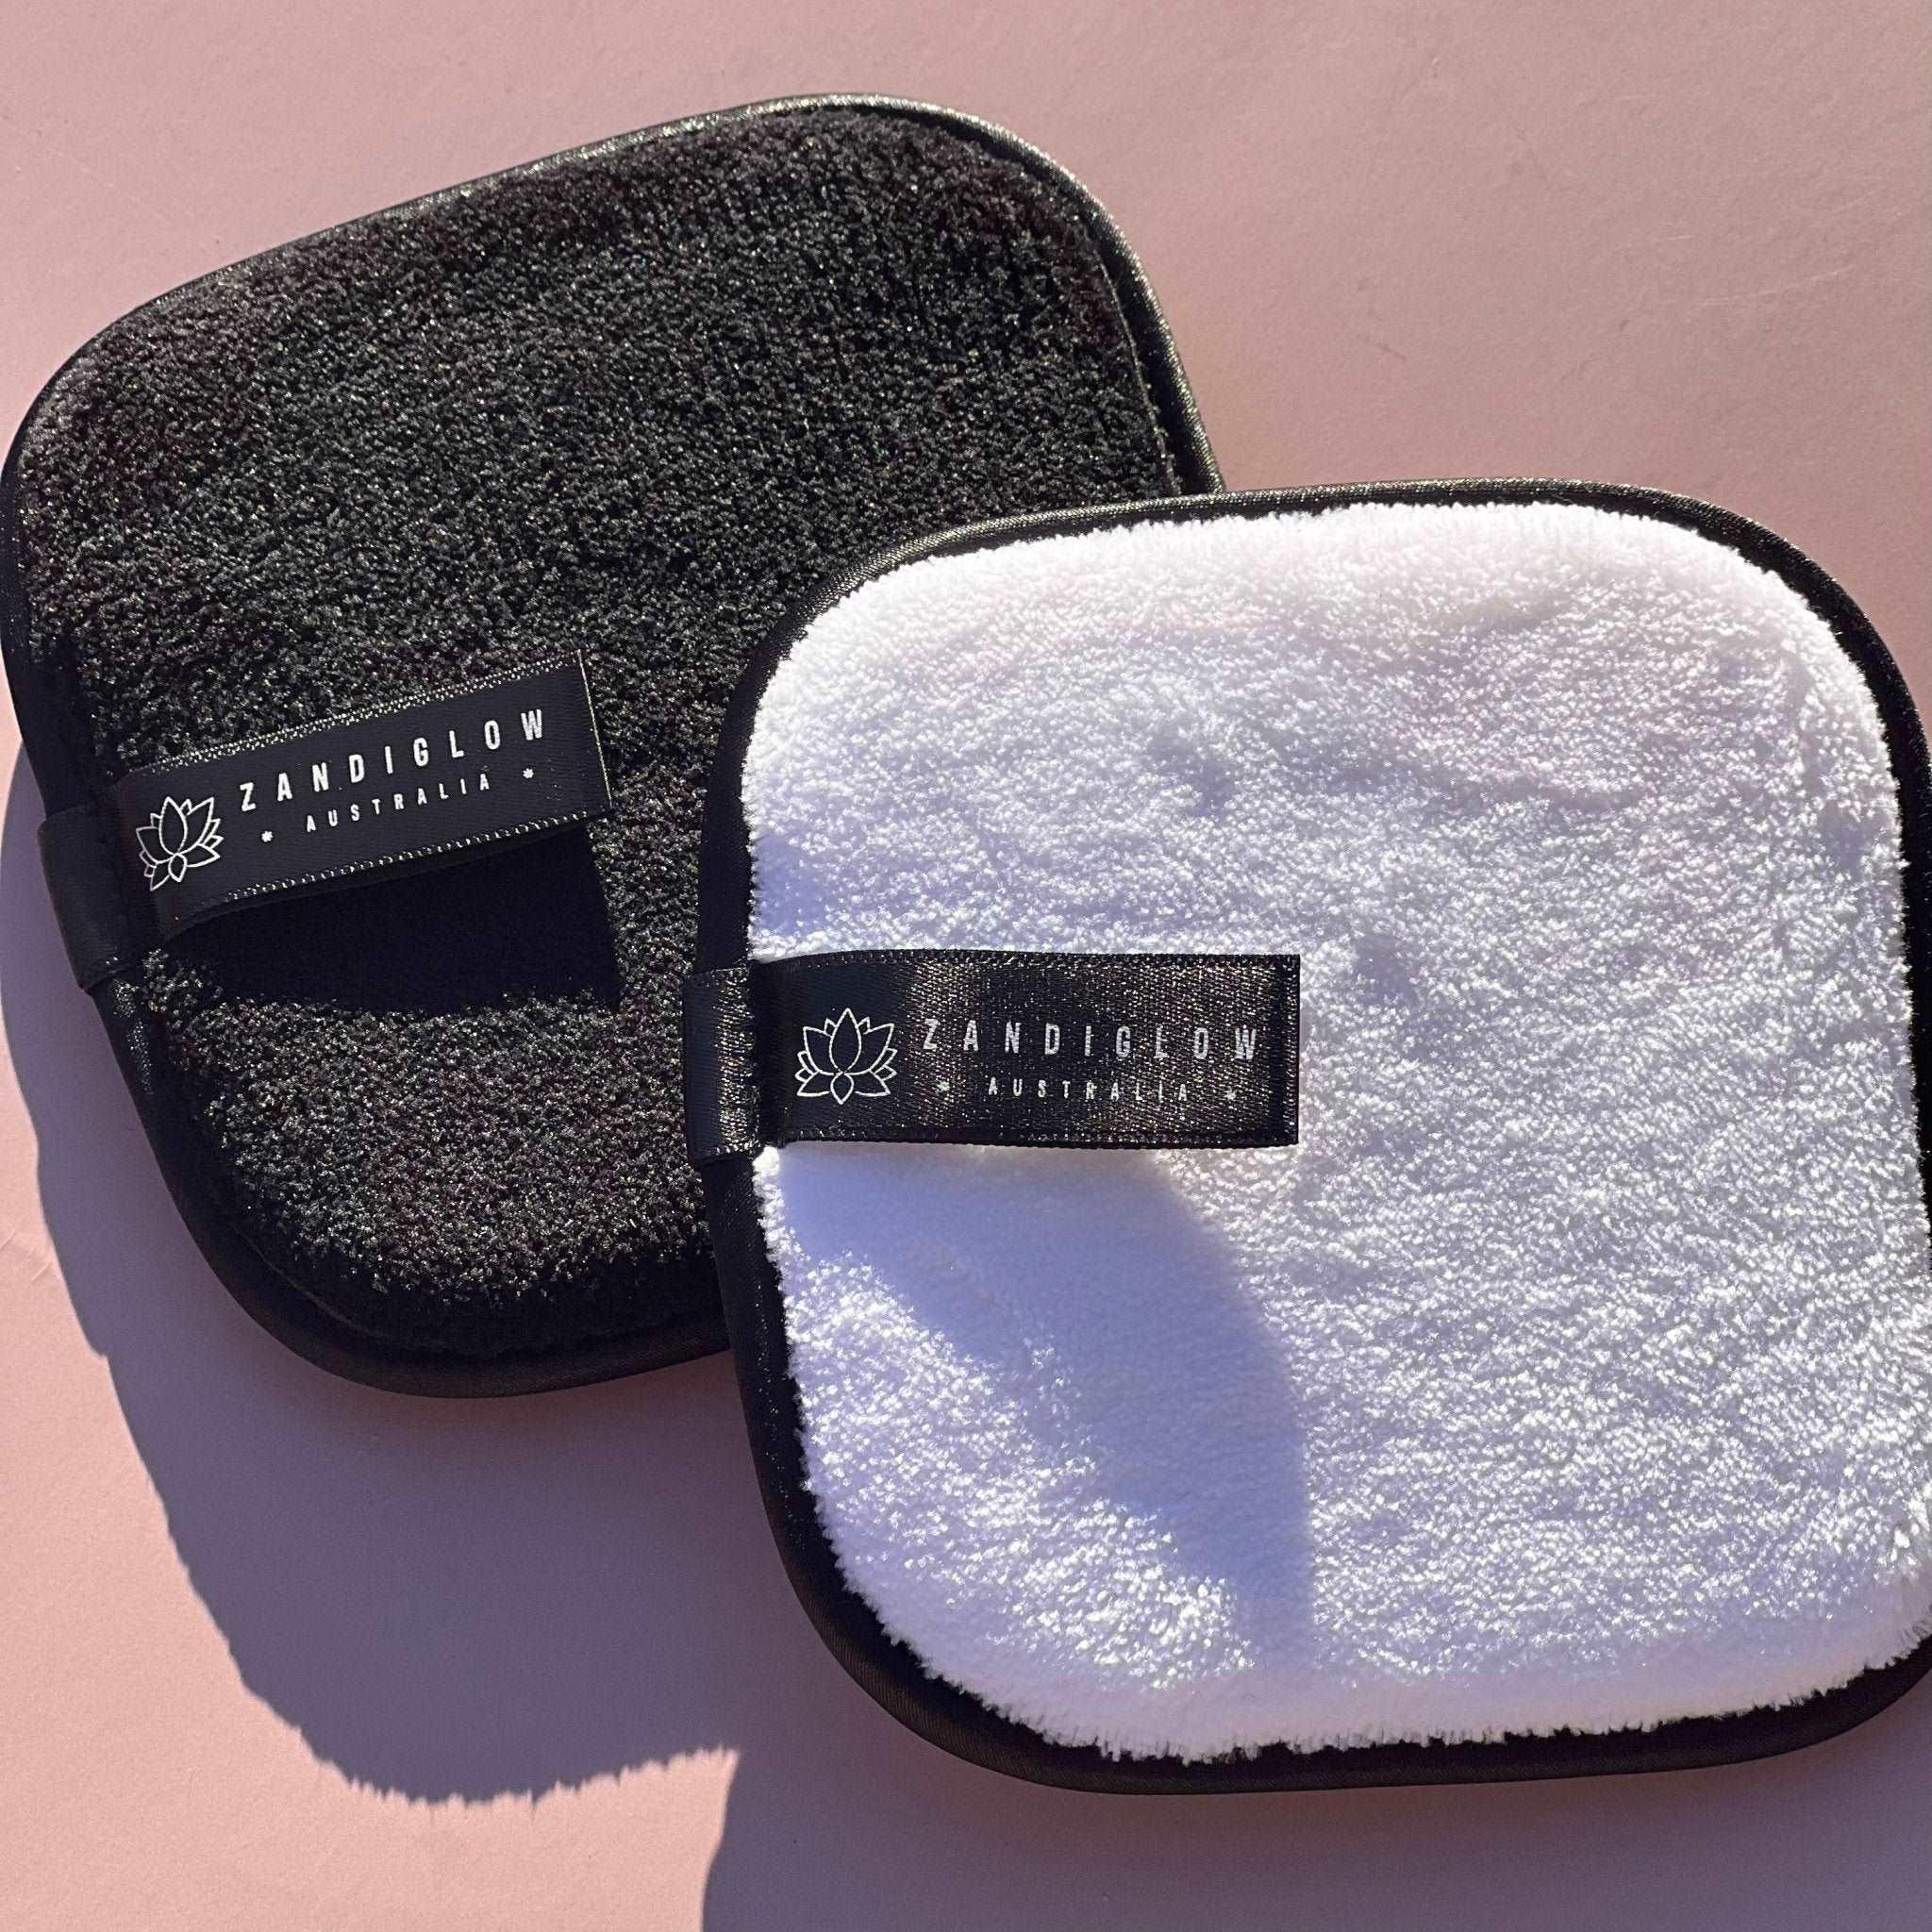 REUSABLE MAKEUP REMOVER PAD - Glam Body